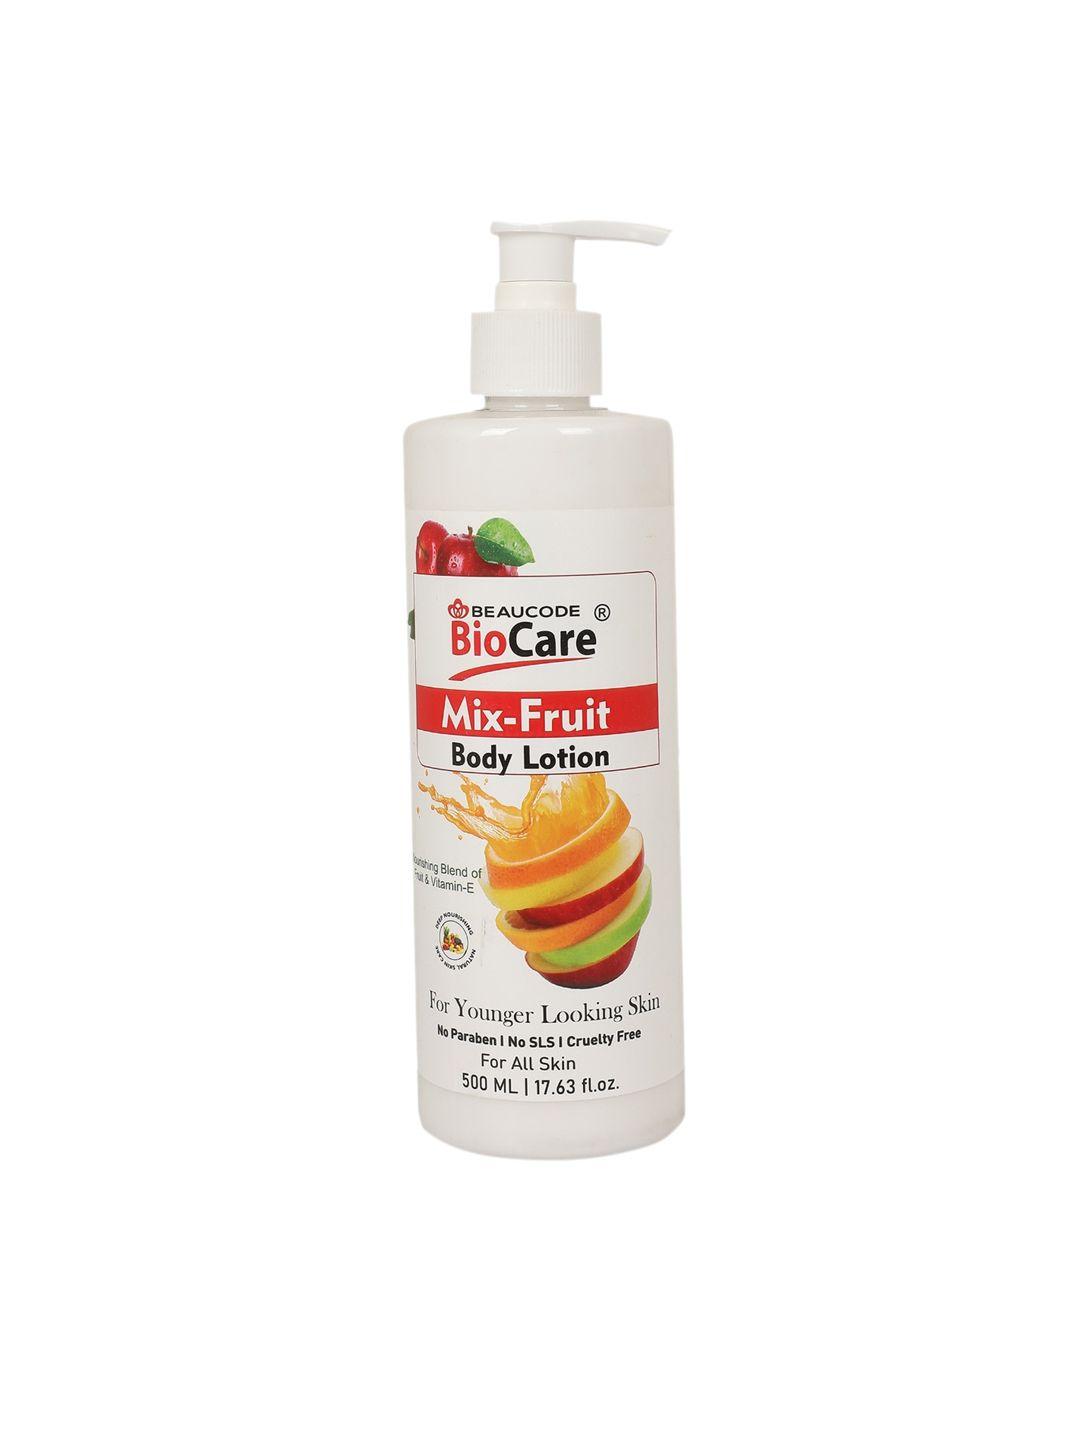 beaucode biocare mix-fruit body lotion 500 ml